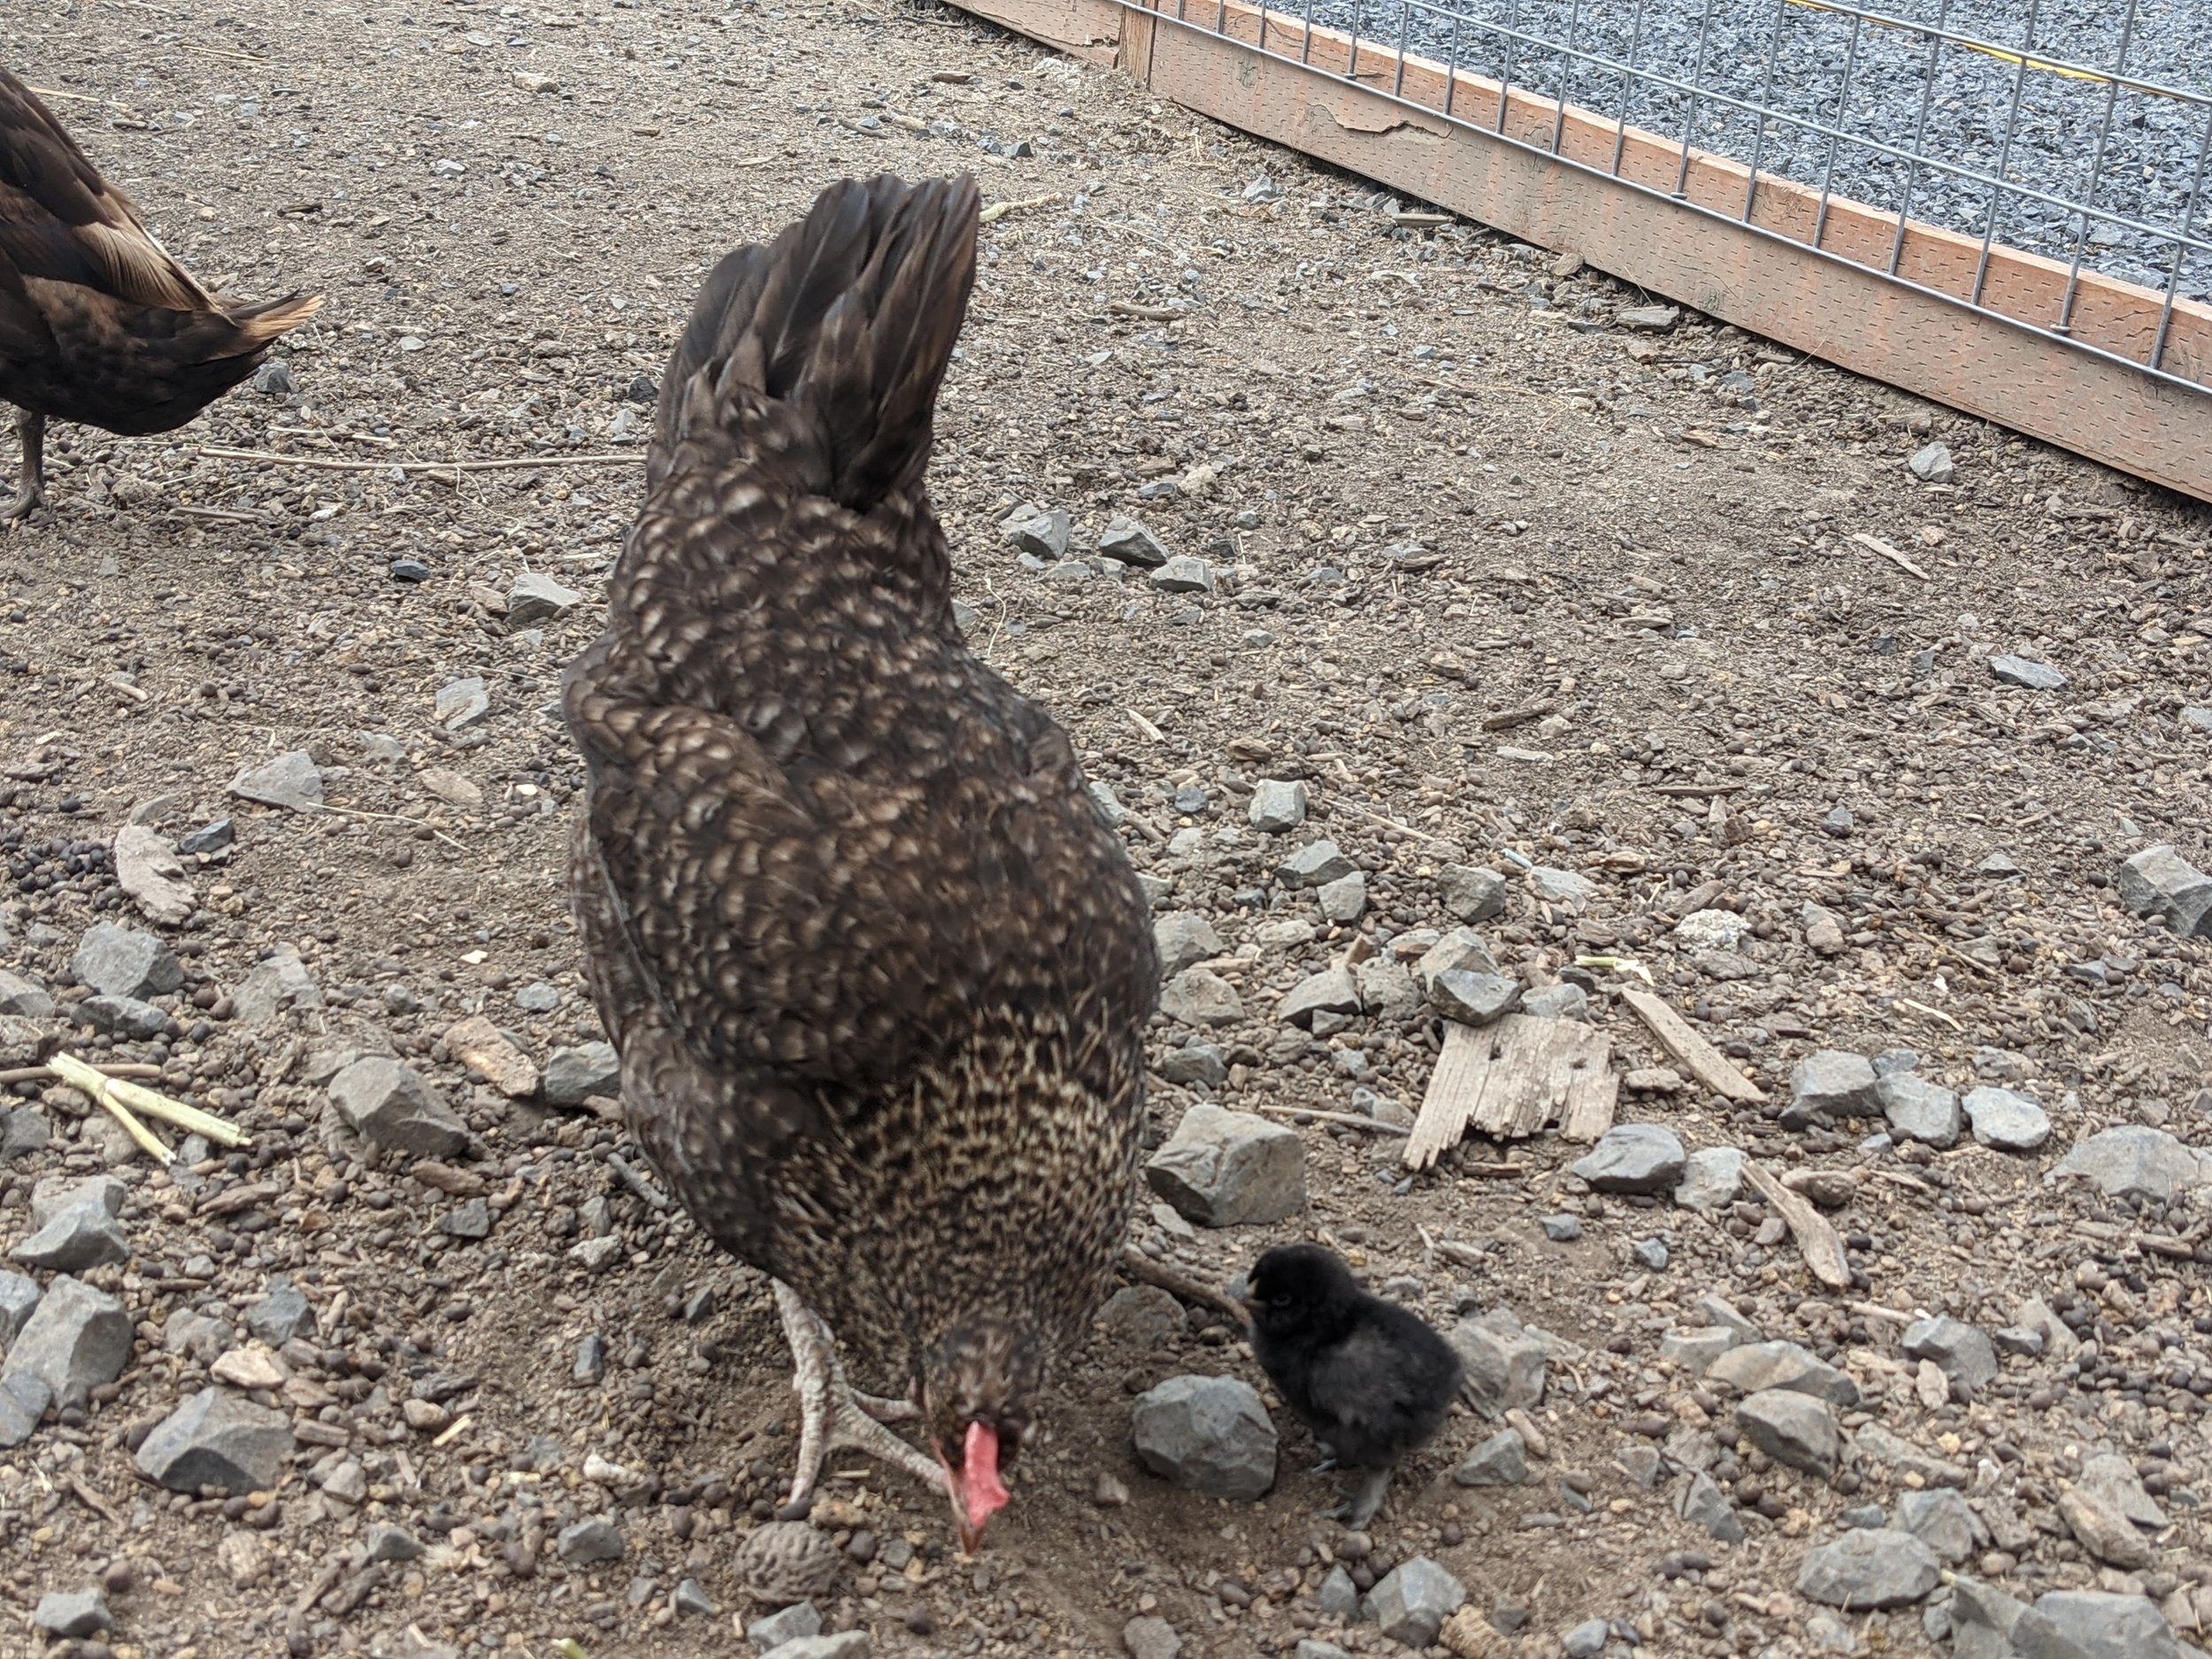  Bonnie had her first two chicks this spring. During the same time, one of our turkeys became very aggressive and started picking on the chicks and the ducks. He has been re-homed, and now lives on another farm with three other turkeys. Whenever an a